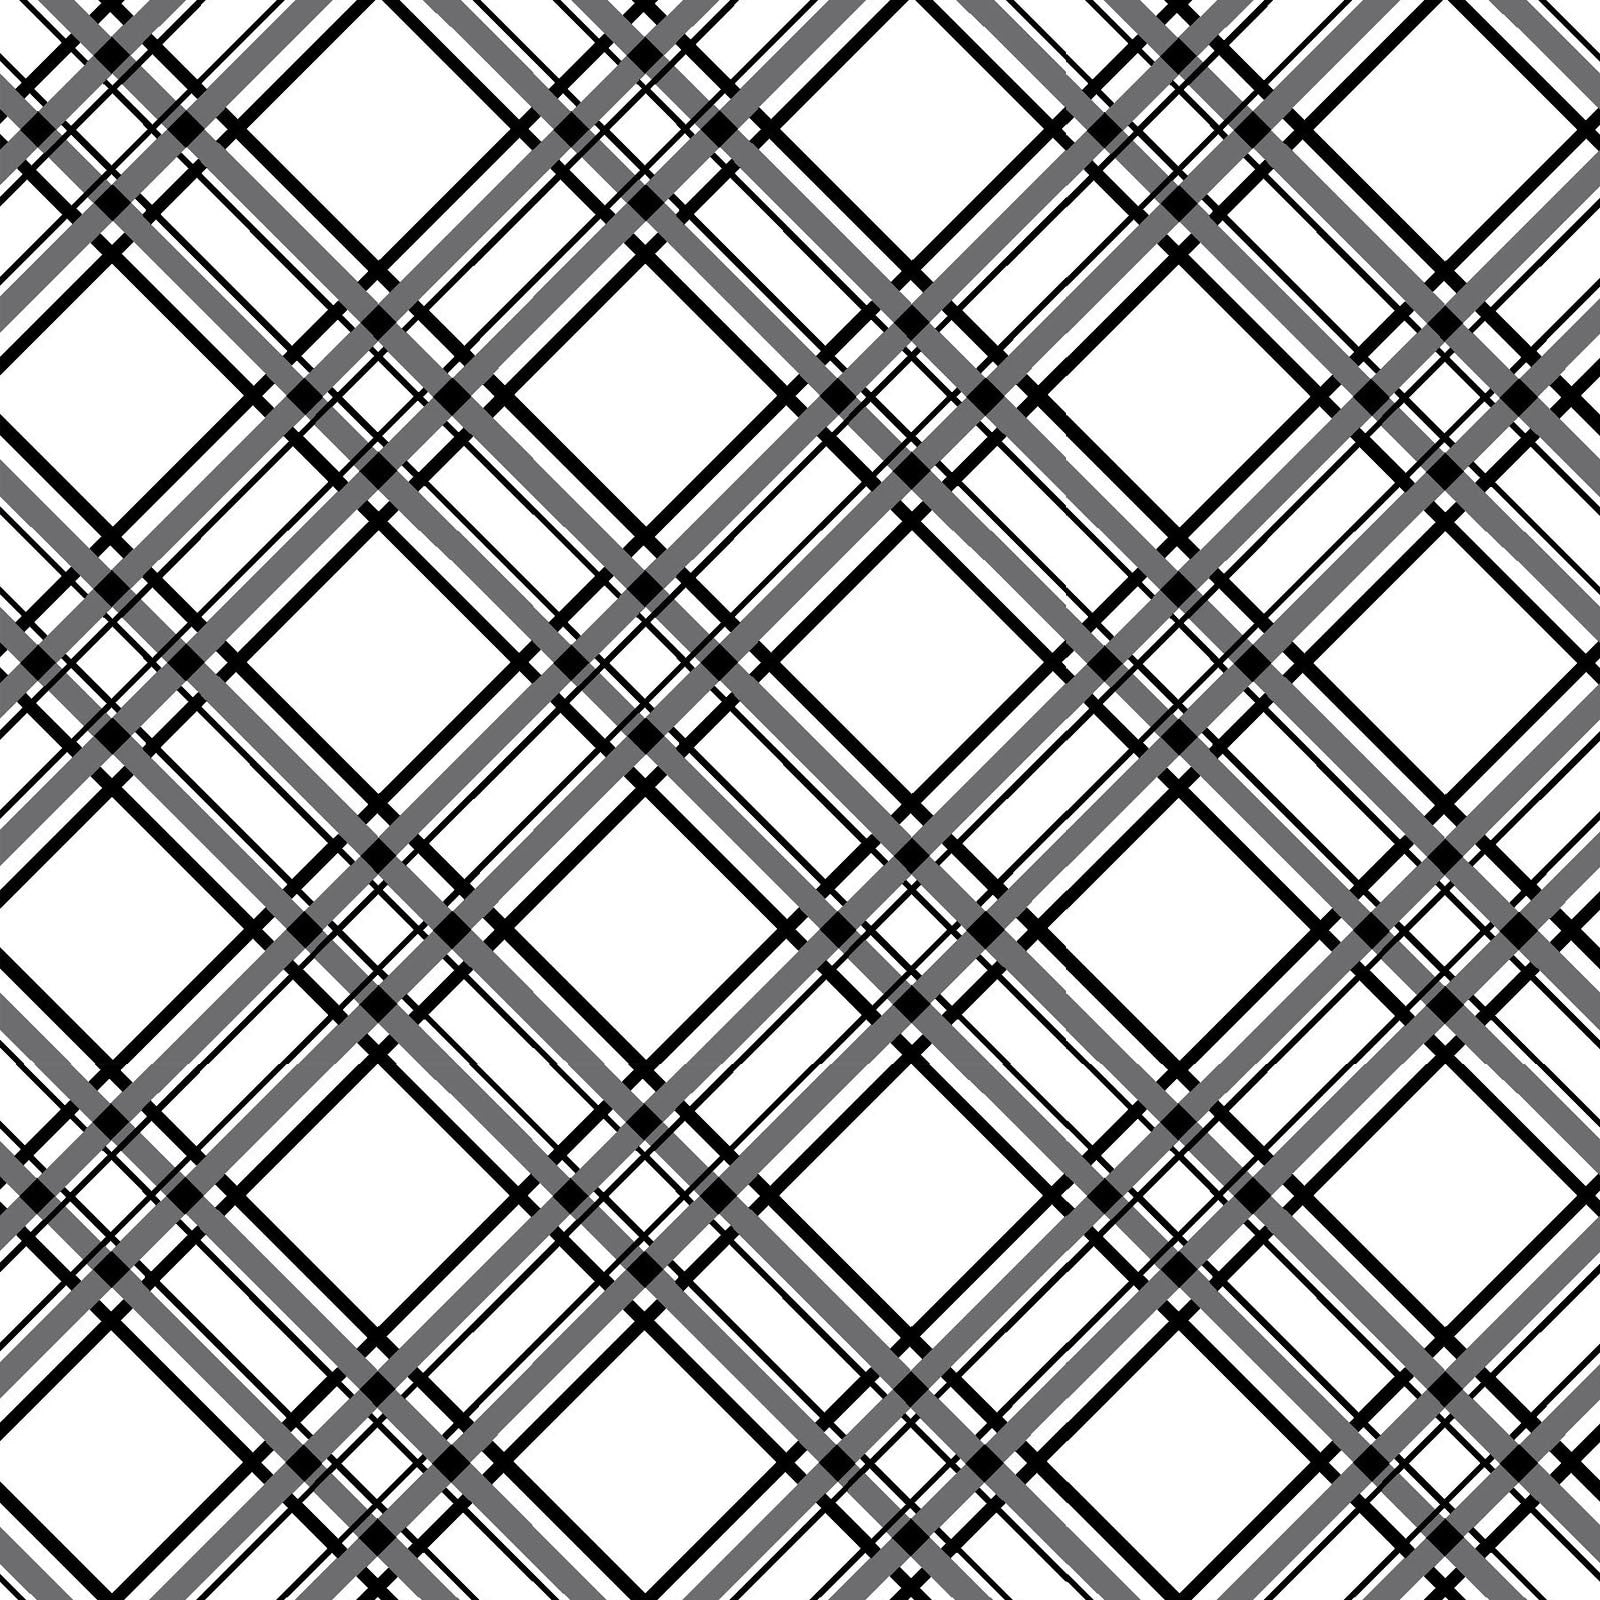 Diagonal Plaid in black and white (MAS8244-K) is part of the Kimberbell Basics line designed by Kim Christopherson for Maywood Studio. This fabric features black plaid stripes on the diagonal over a white background to add variety to your project. As part of the Kimberbell Basics line, it compliments other fabrics in the line.